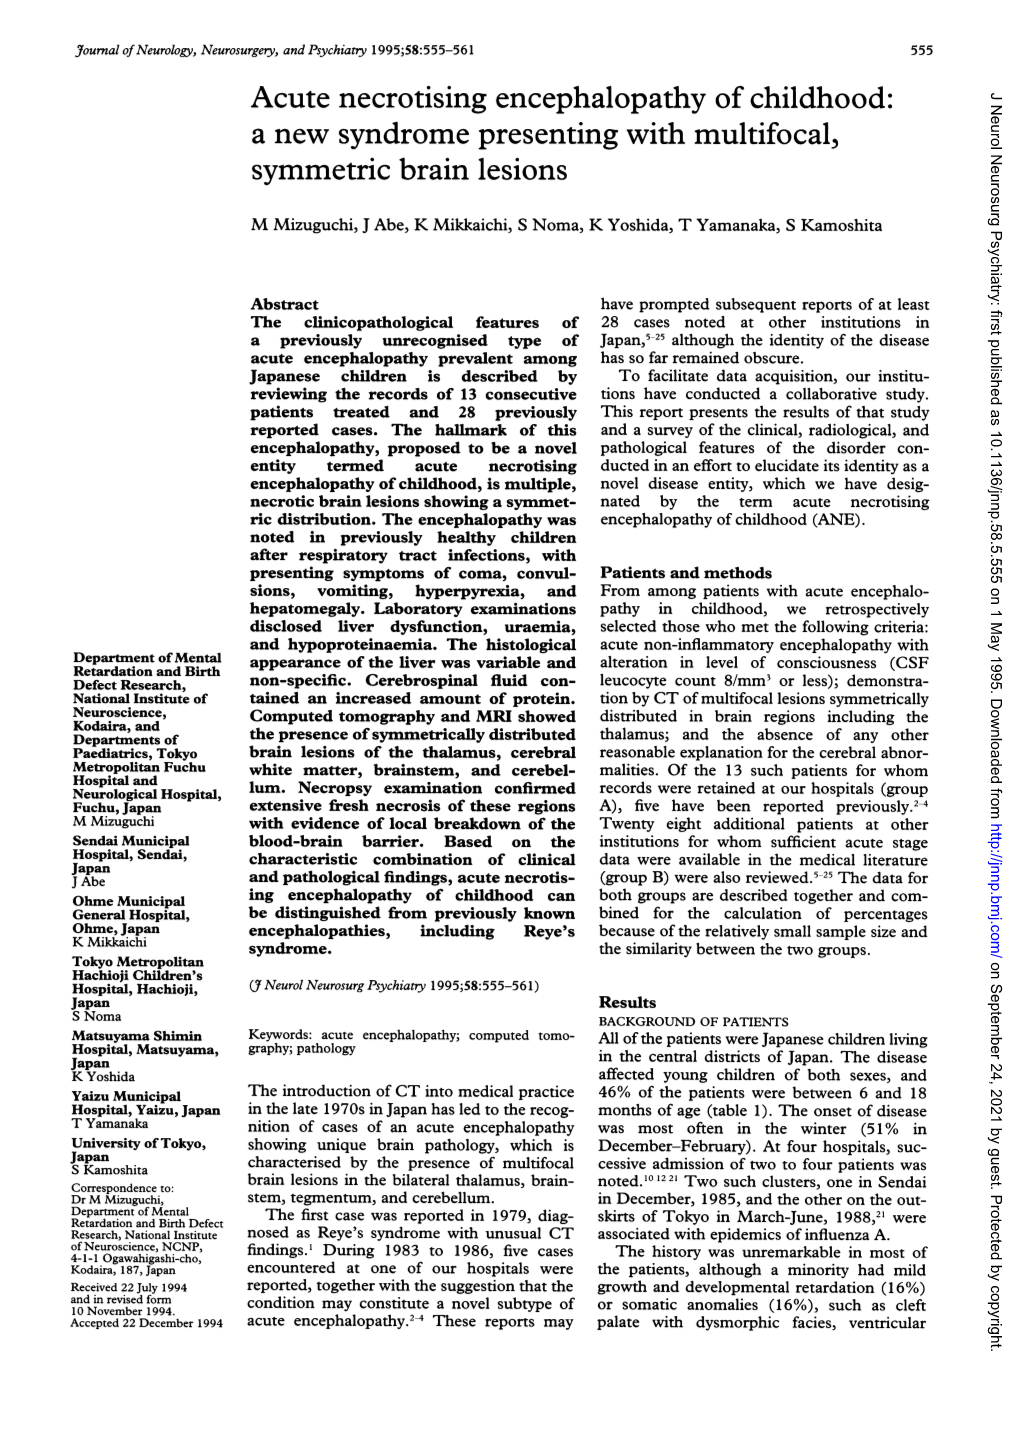 Acute Necrotising Encephalopathy of Childhood: J Neurol Neurosurg Psychiatry: First Published As 10.1136/Jnnp.58.5.555 on 1 May 1995